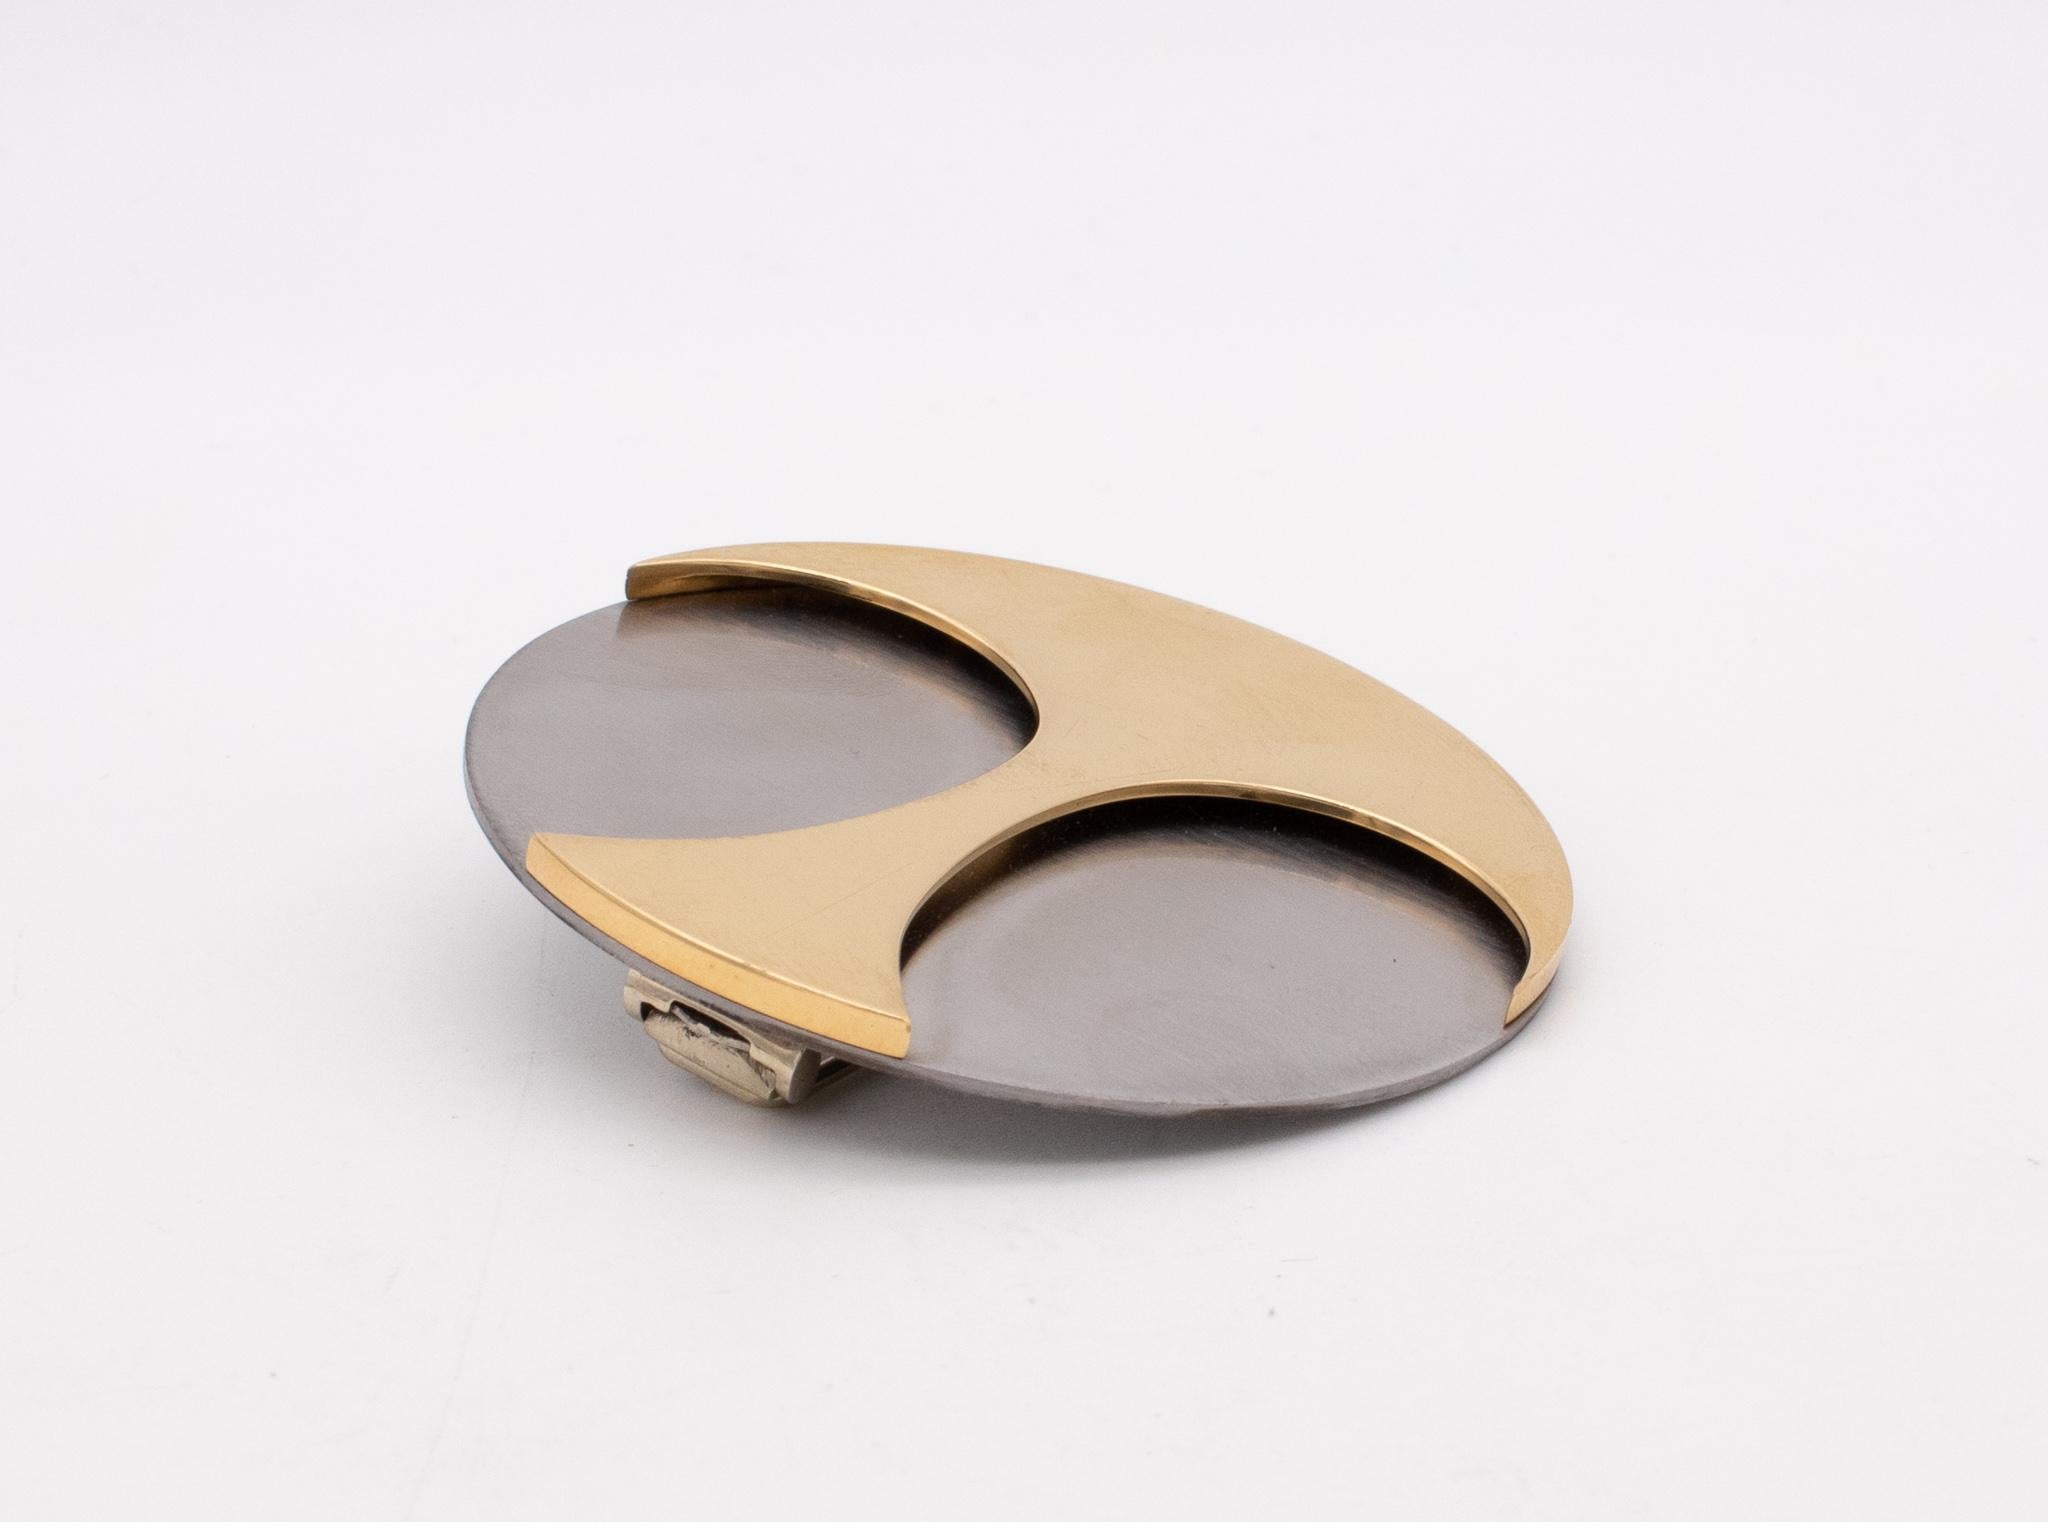 Bauhaus Germany 1970 Modernist Pendant Brooch in 18Kt Yellow Gold and Steel In Excellent Condition For Sale In Miami, FL